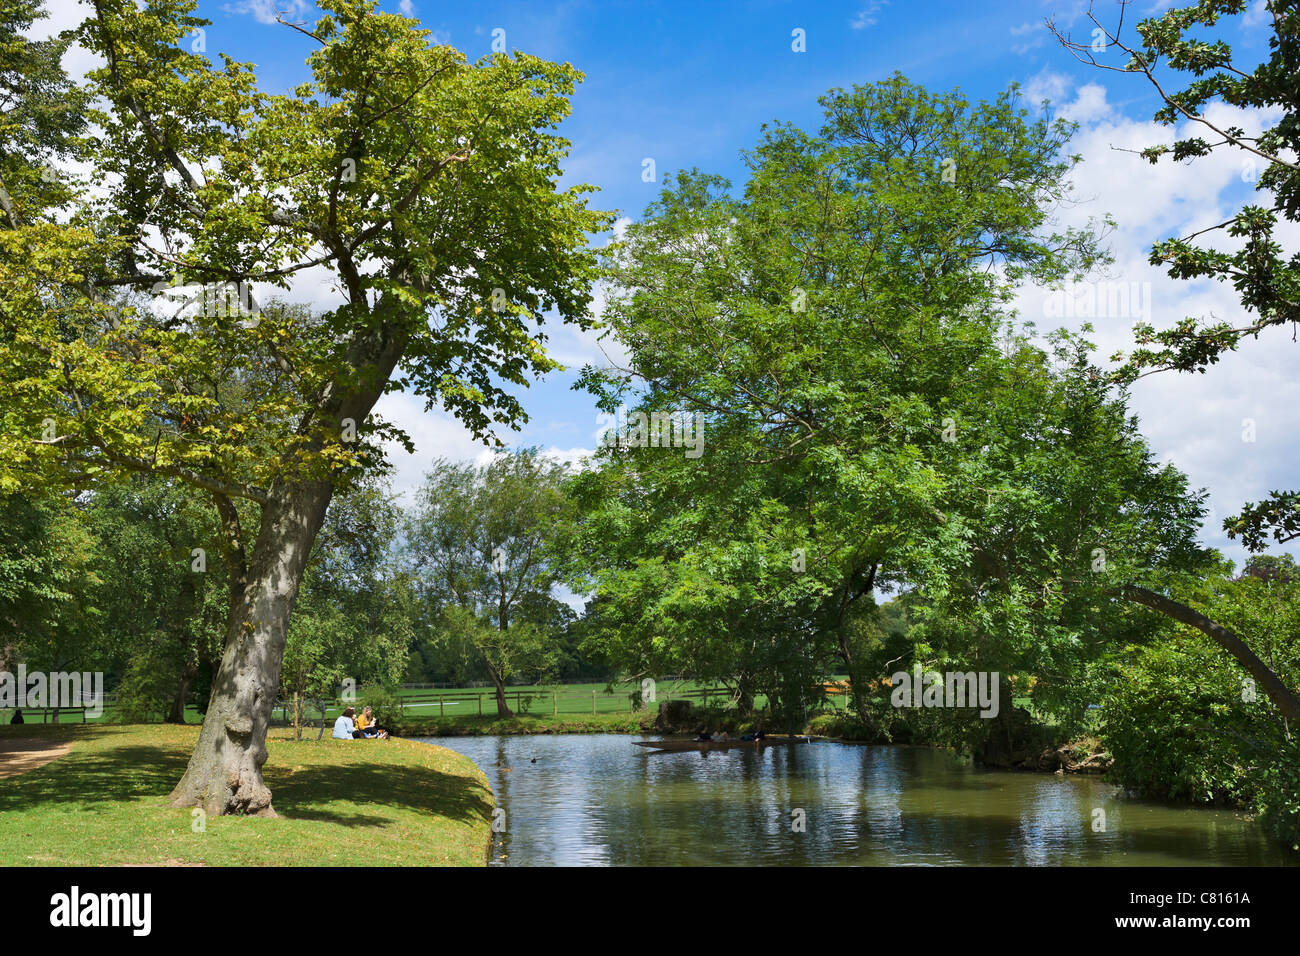 Picnic on the banks of the River Cherwell near Christ Church Meadow, Oxford, Oxfordshire, England, UK Stock Photo